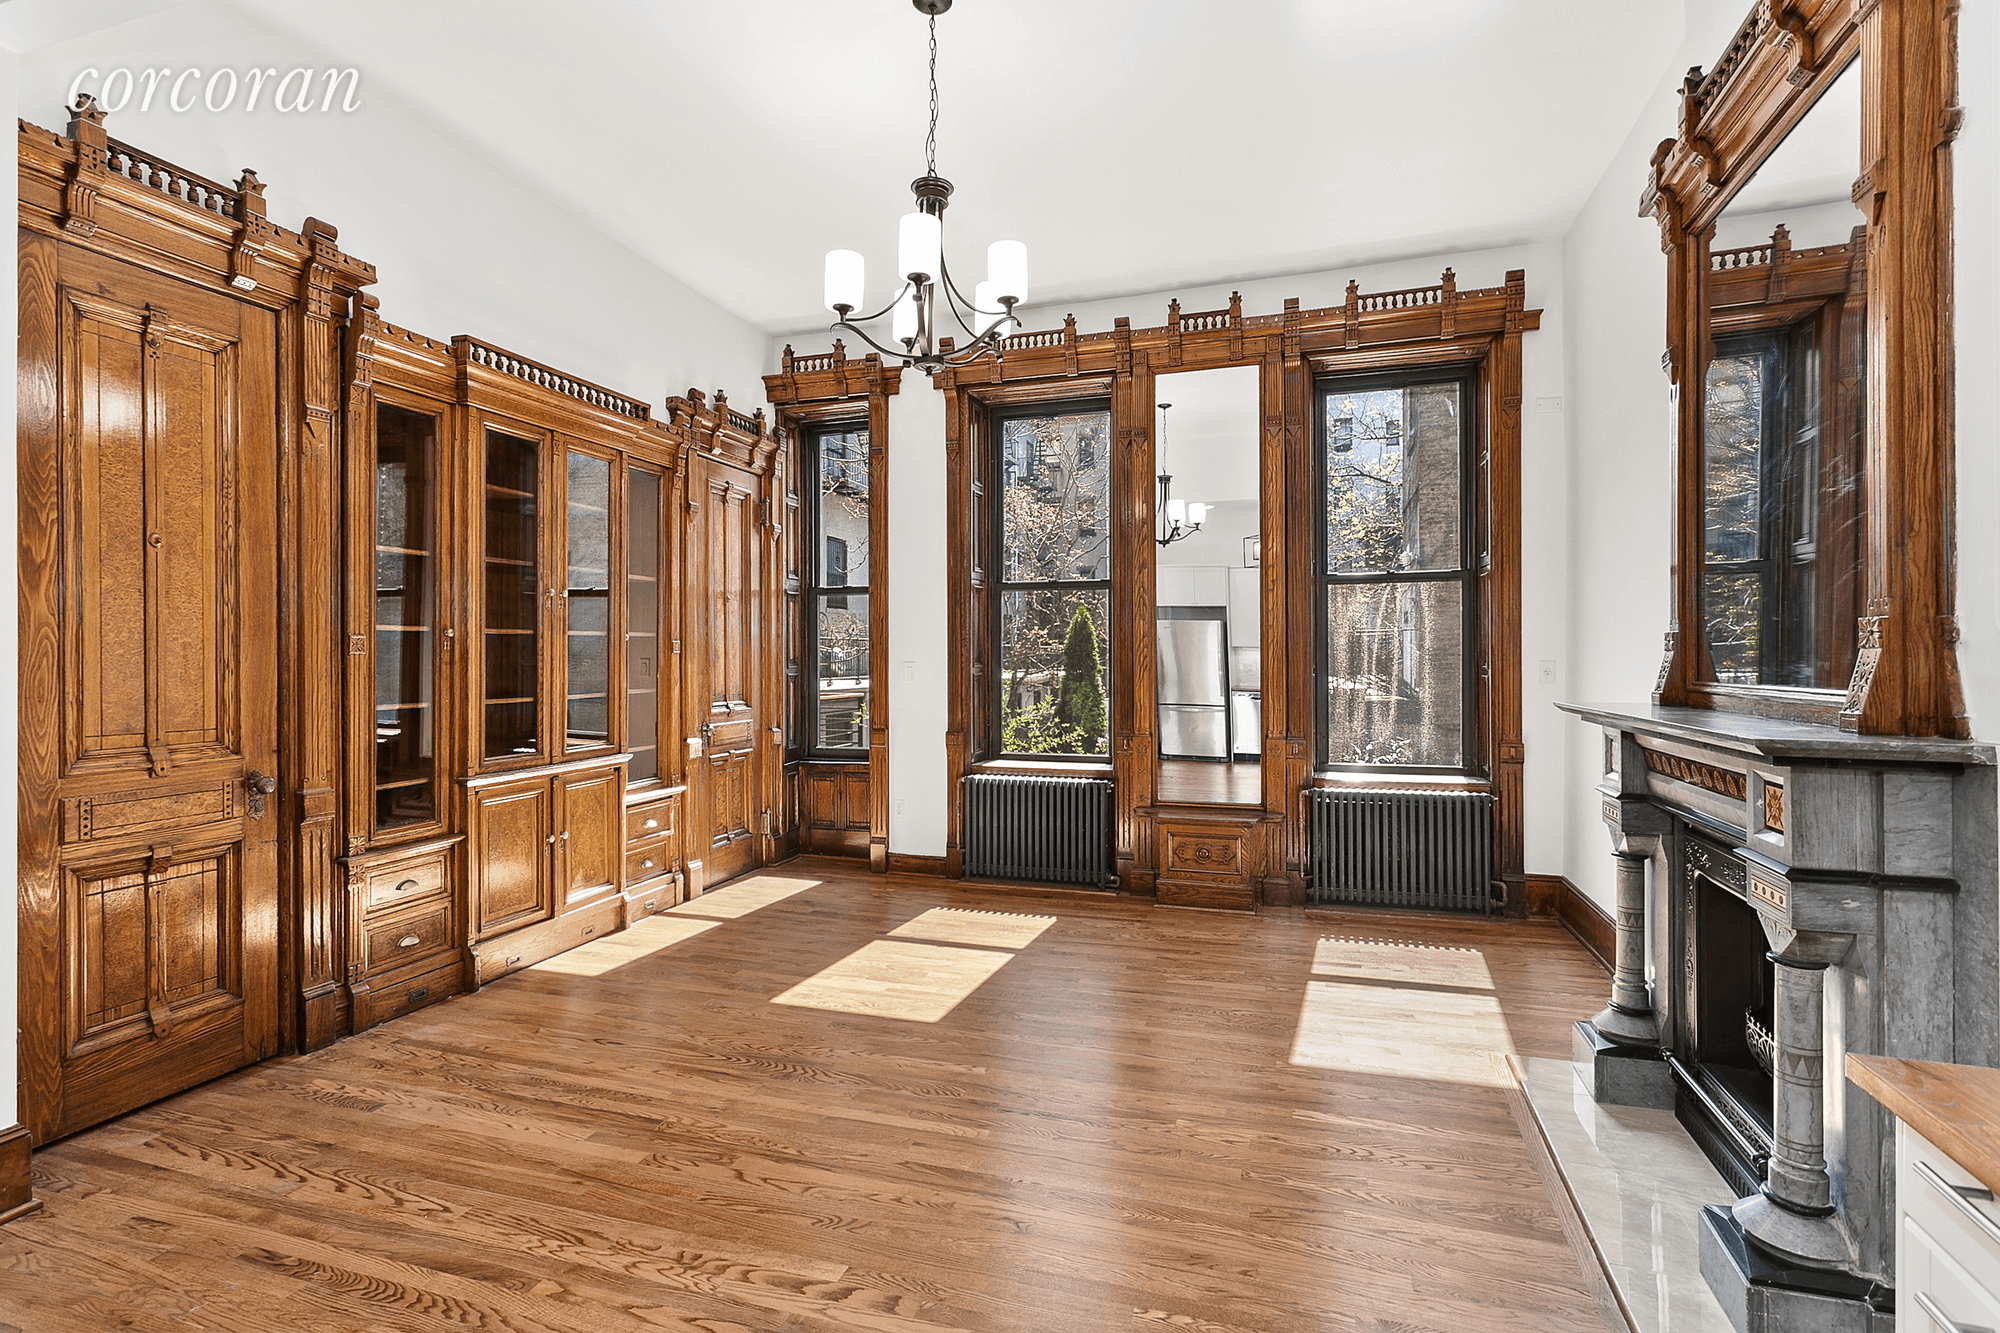 This is a truly unbelievable deal for this dream home at 2009 Fifth Avenue.